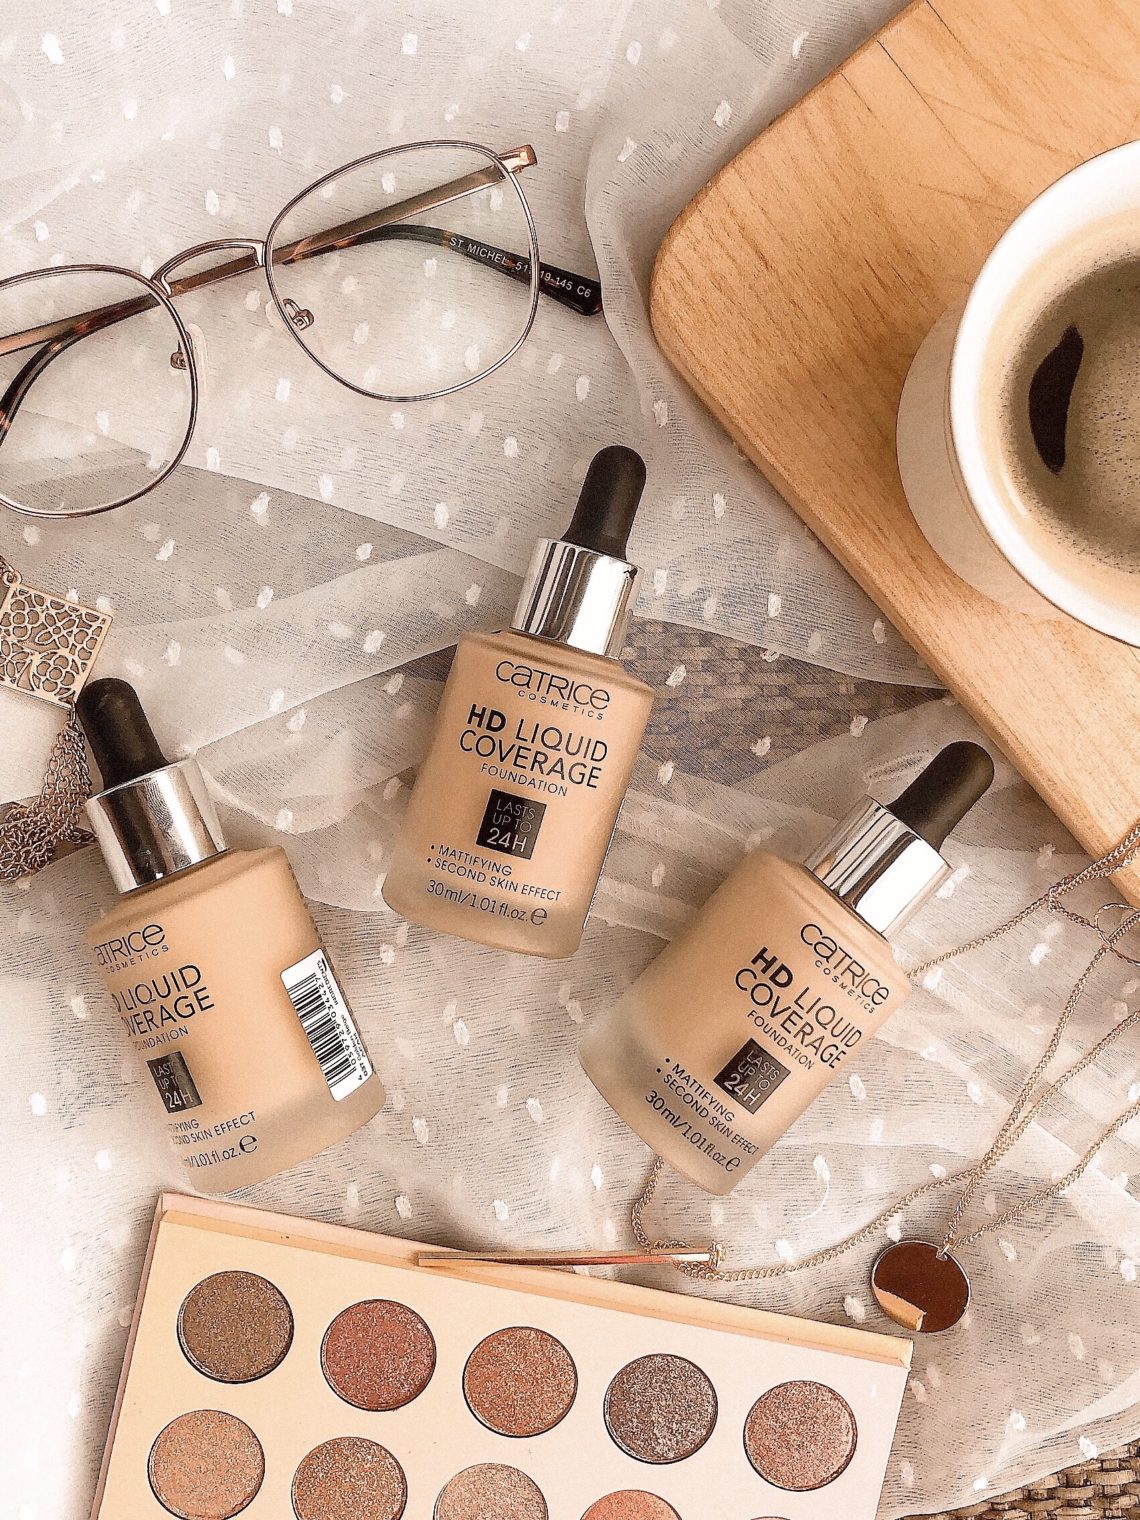 alt="Catrice Cosmetics HD Liquid Coverage Foundation Product Review"